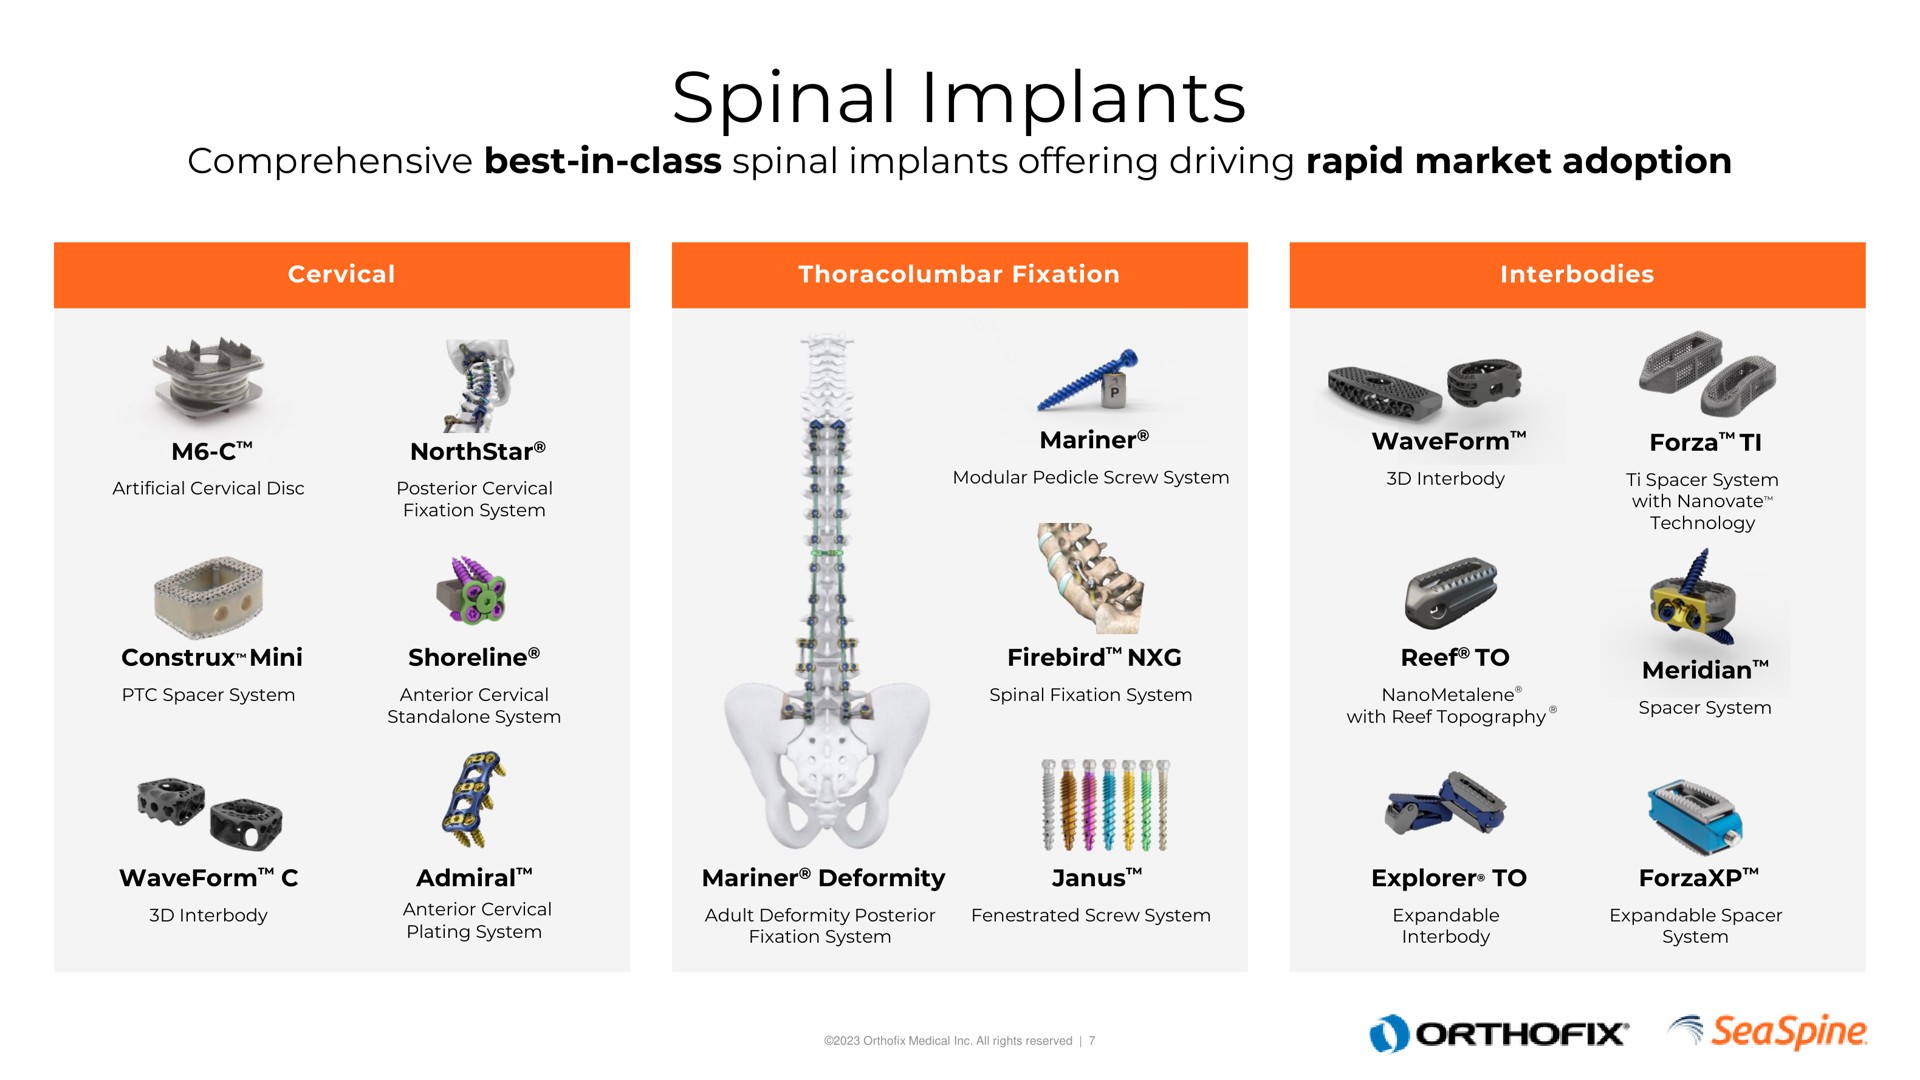 spinal implants by a | Orthofix